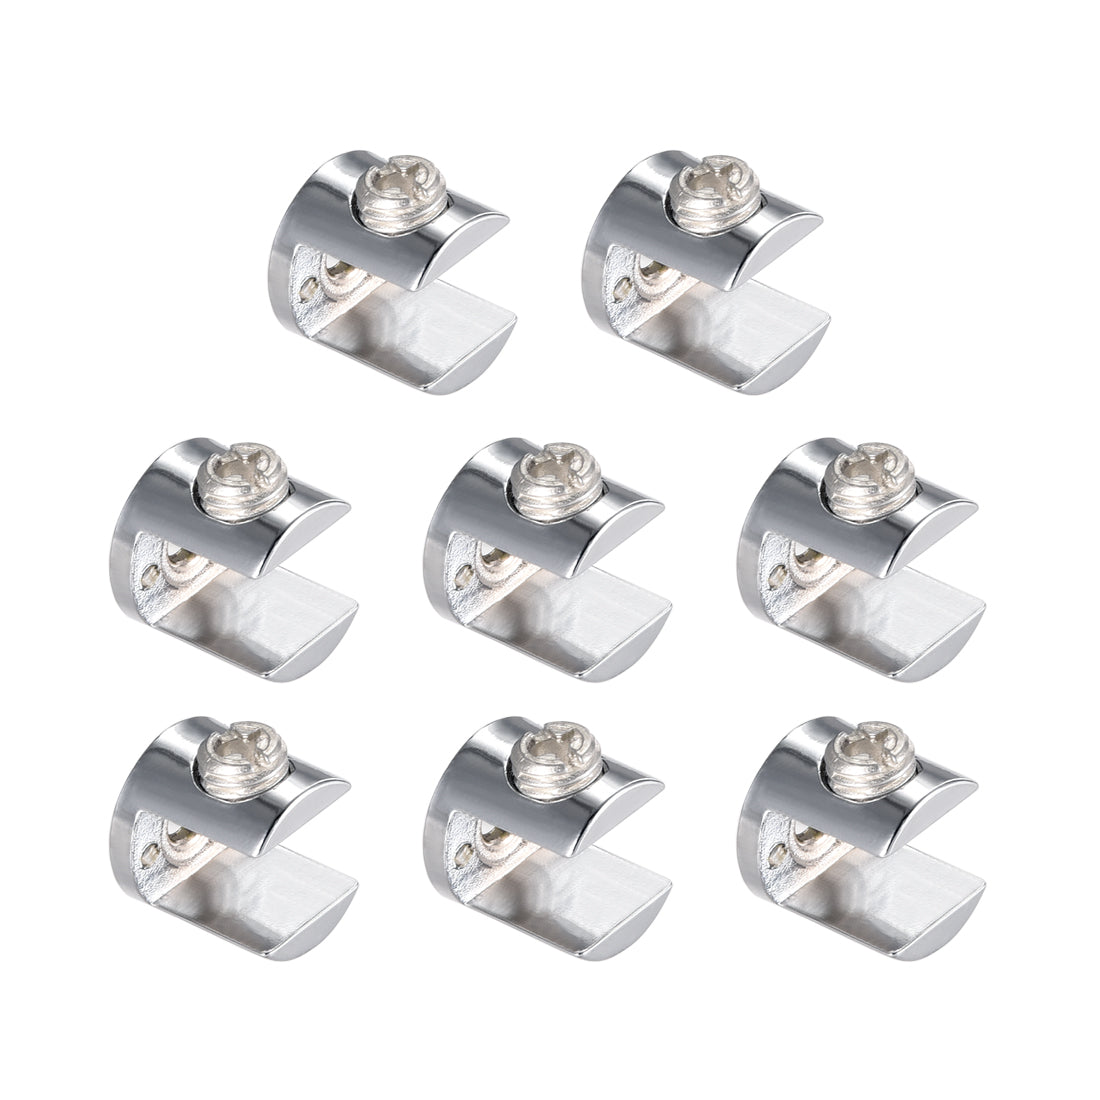 uxcell Uxcell Glass Shelf Support Zinc Alloy Clamp Clip Holder for 8mm-10mm Thick 8pcs